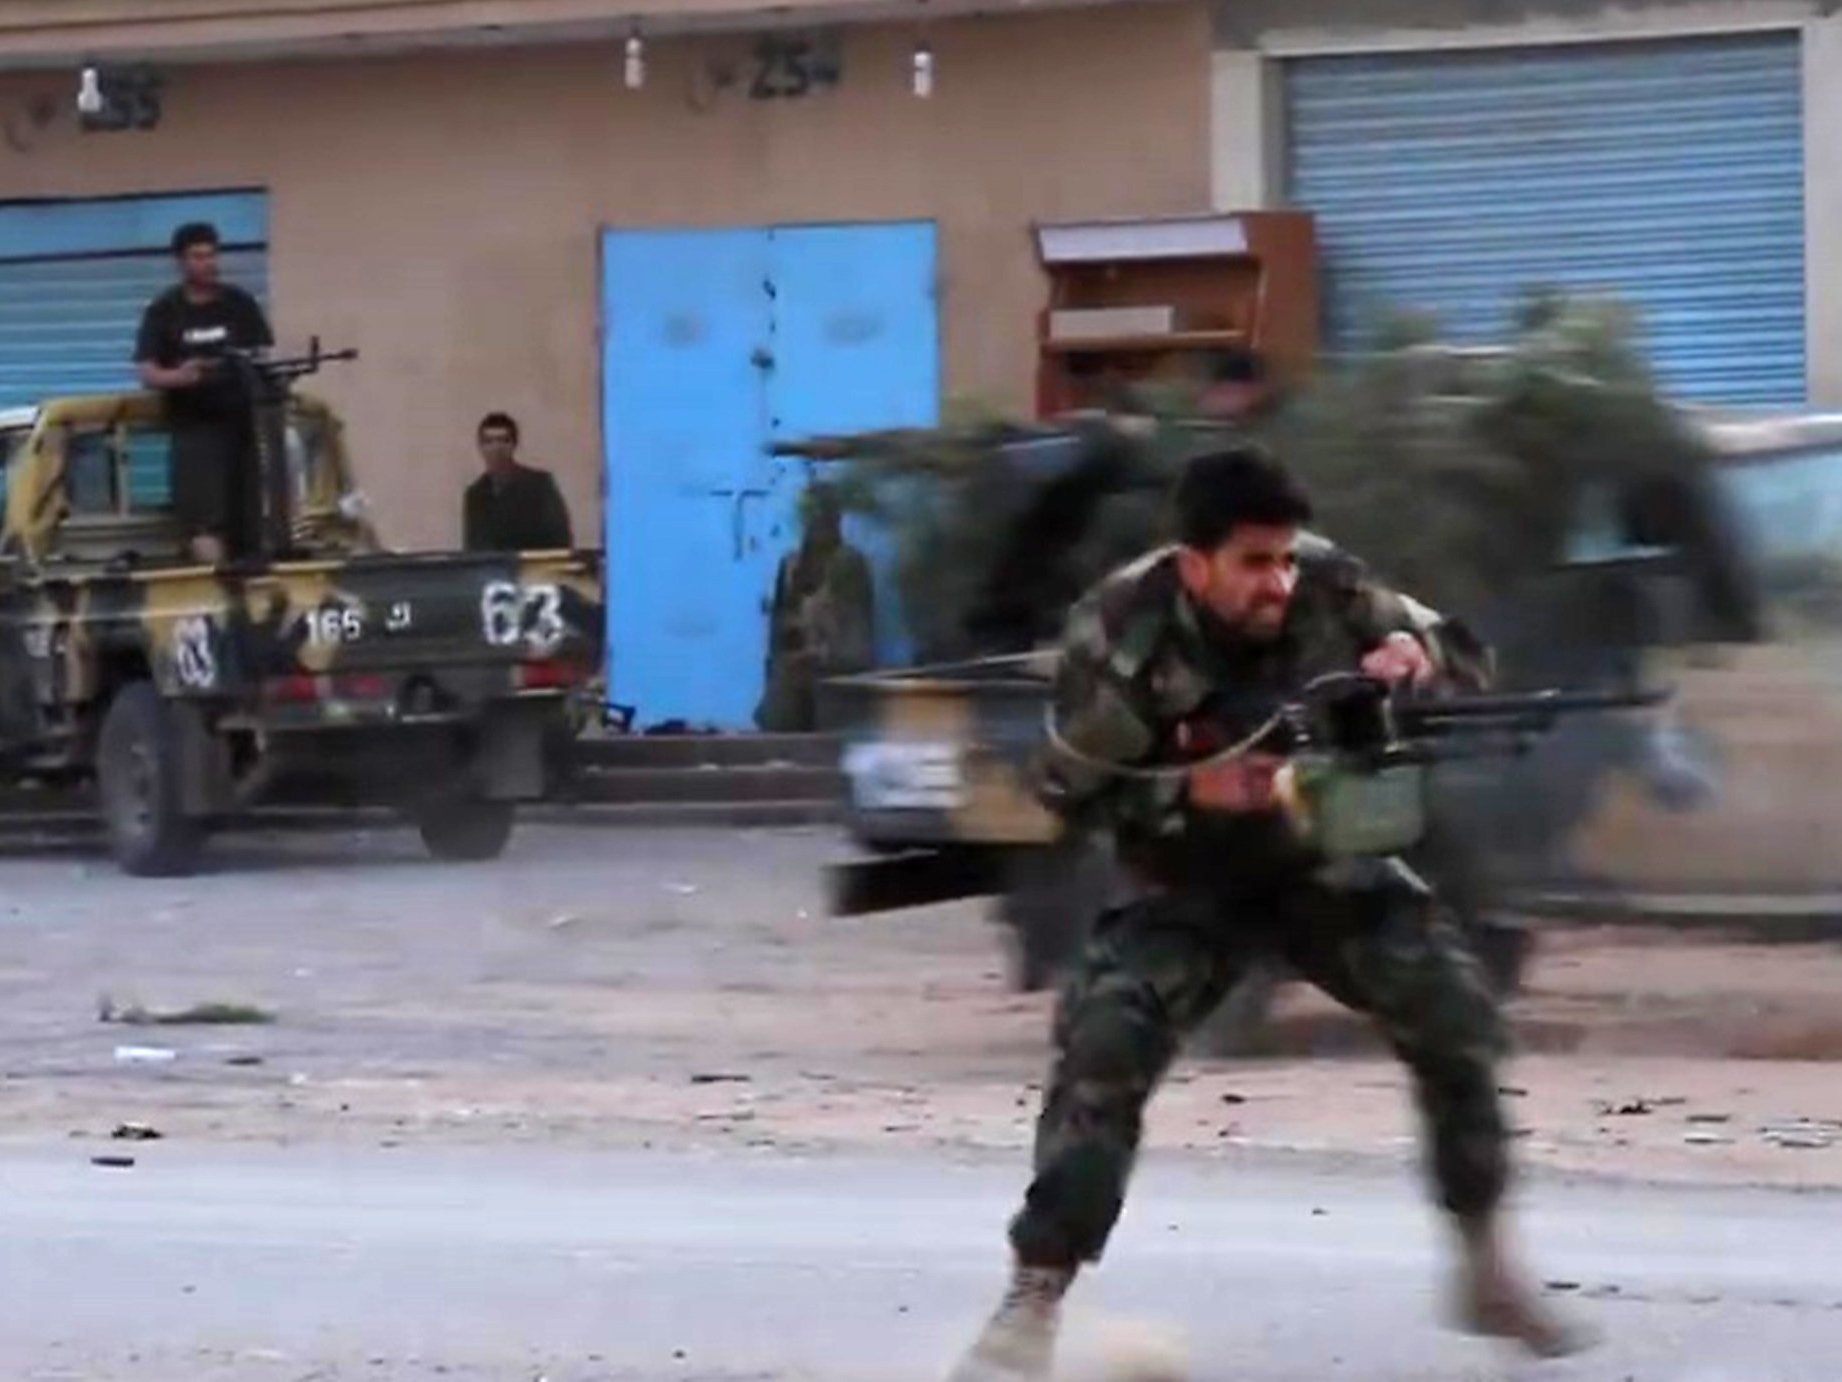 Screengrab from a video published on the LNA’s War Information Division’s Facebook page on 16 April shows a fighter running while firing a machine gun reportedly in a southern suburb of Tripoli